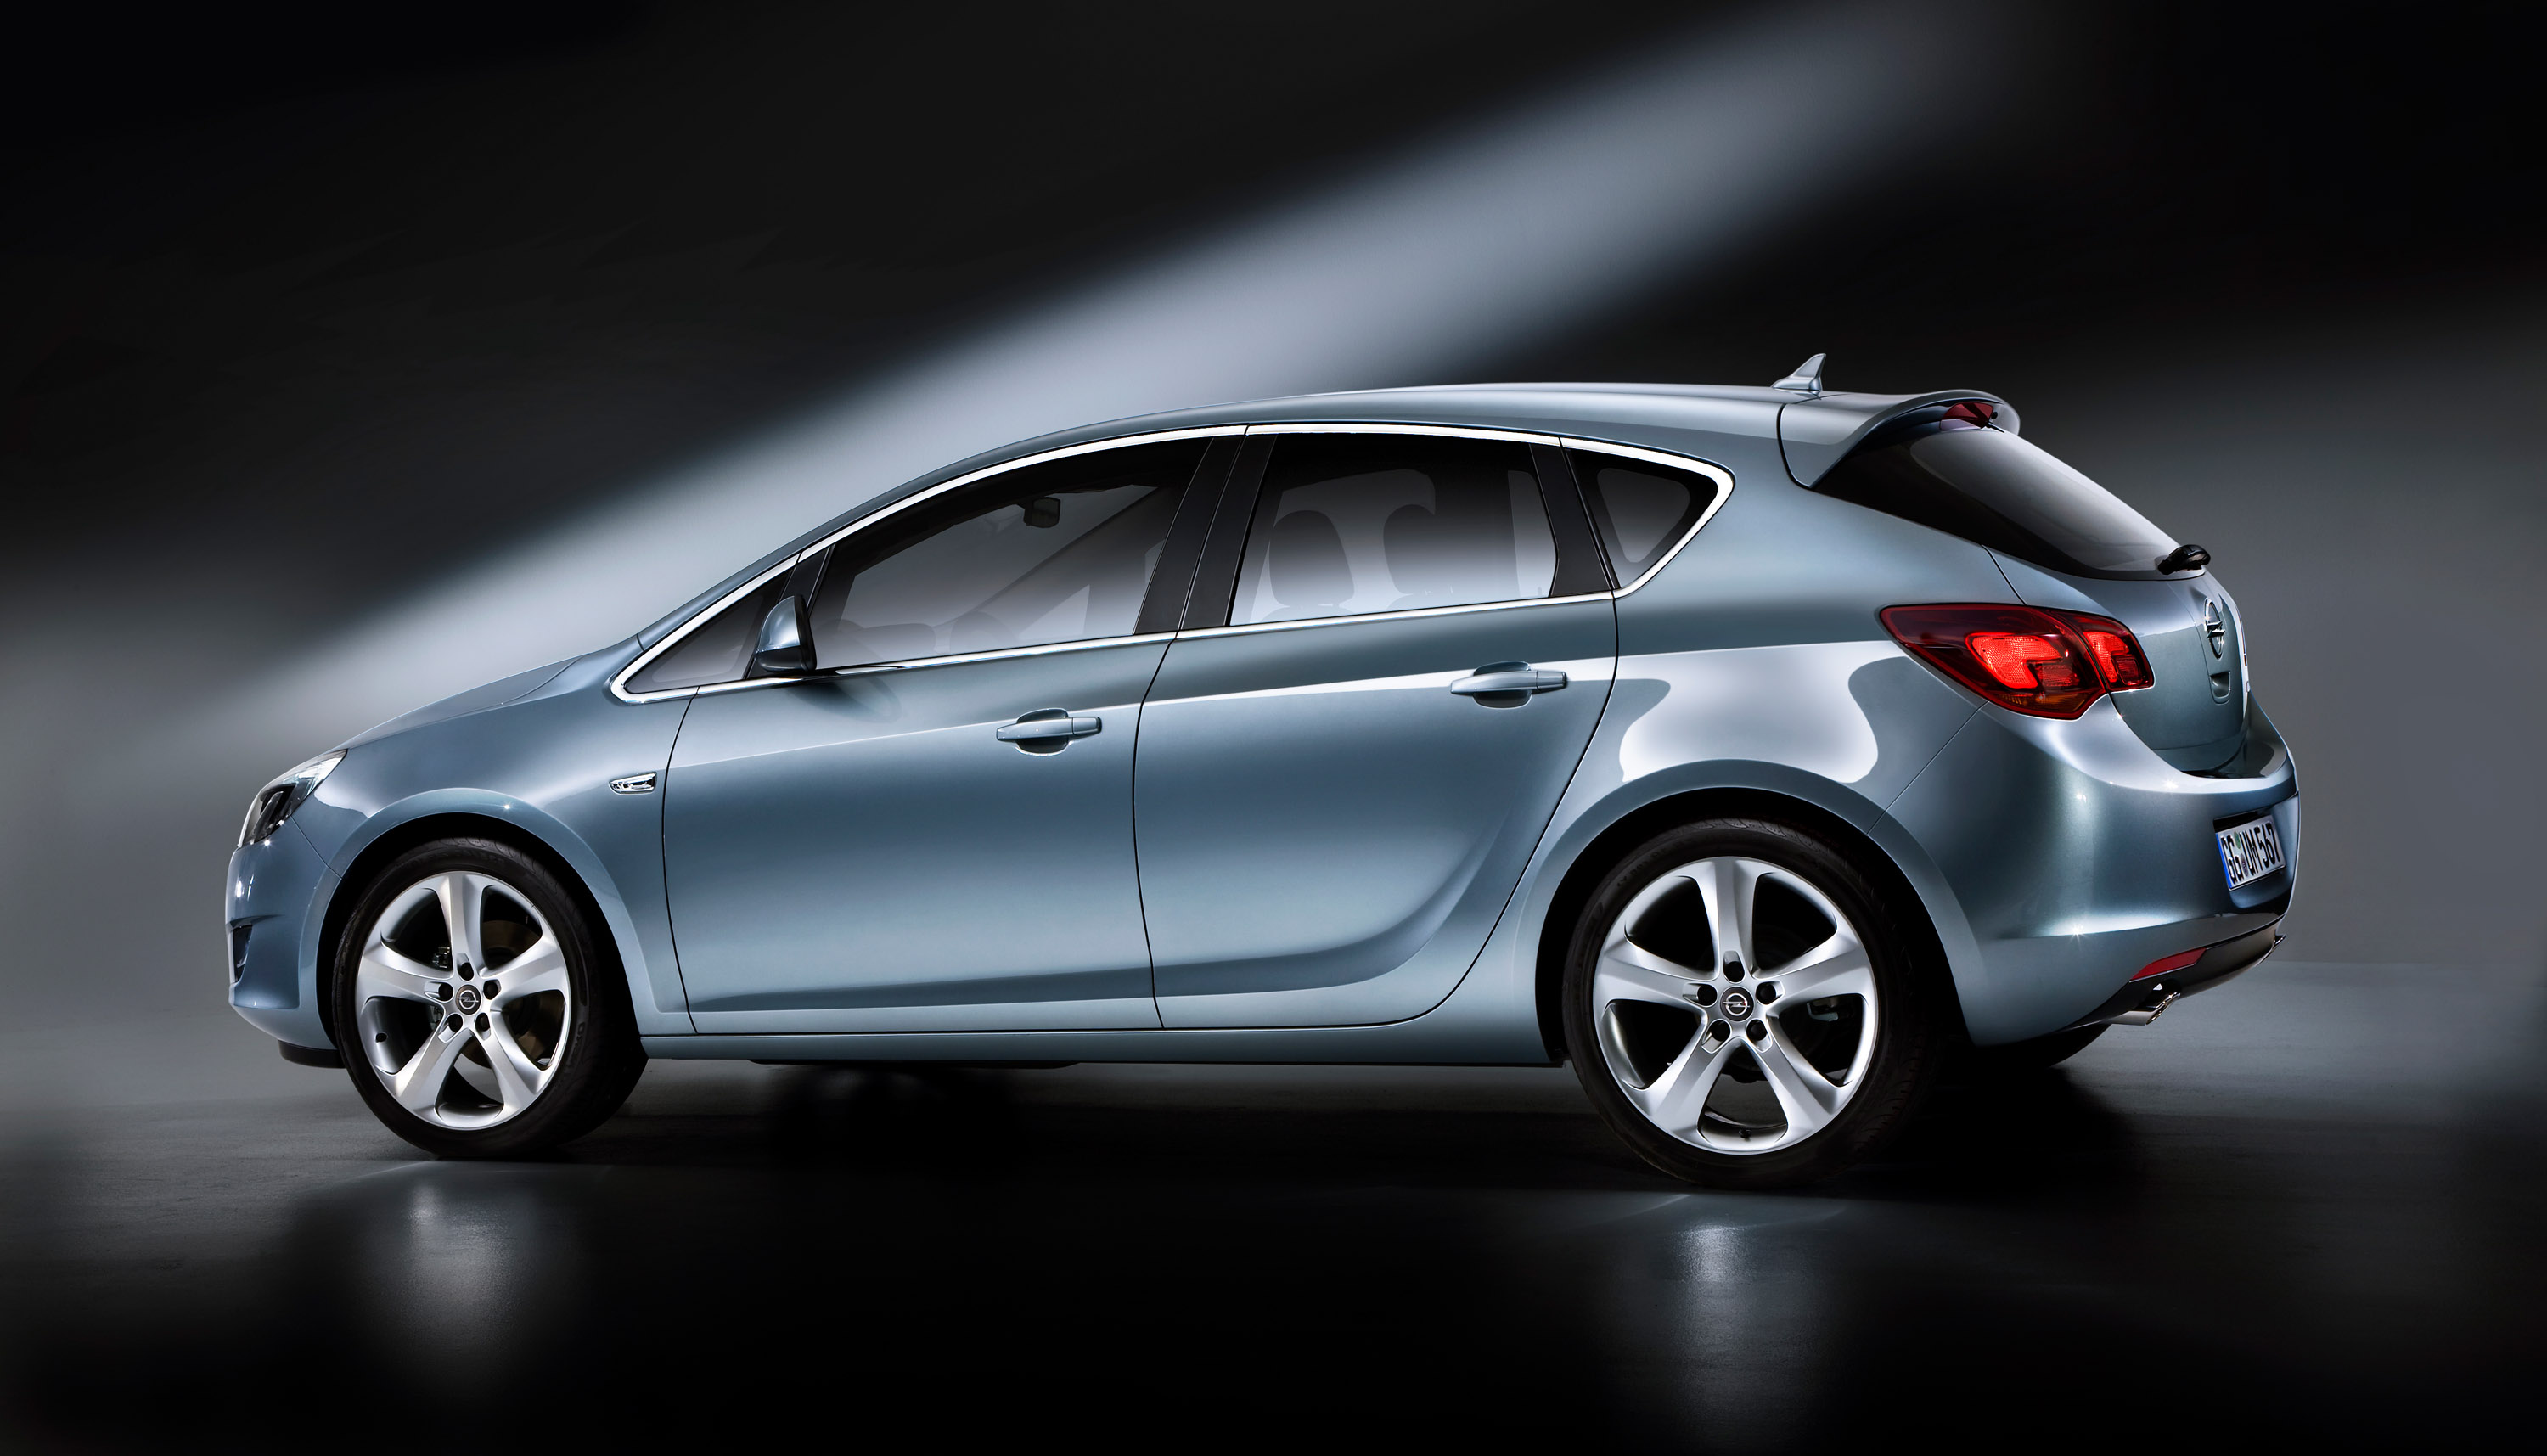 2010 Opel Astra 14 | HD wallpapers free